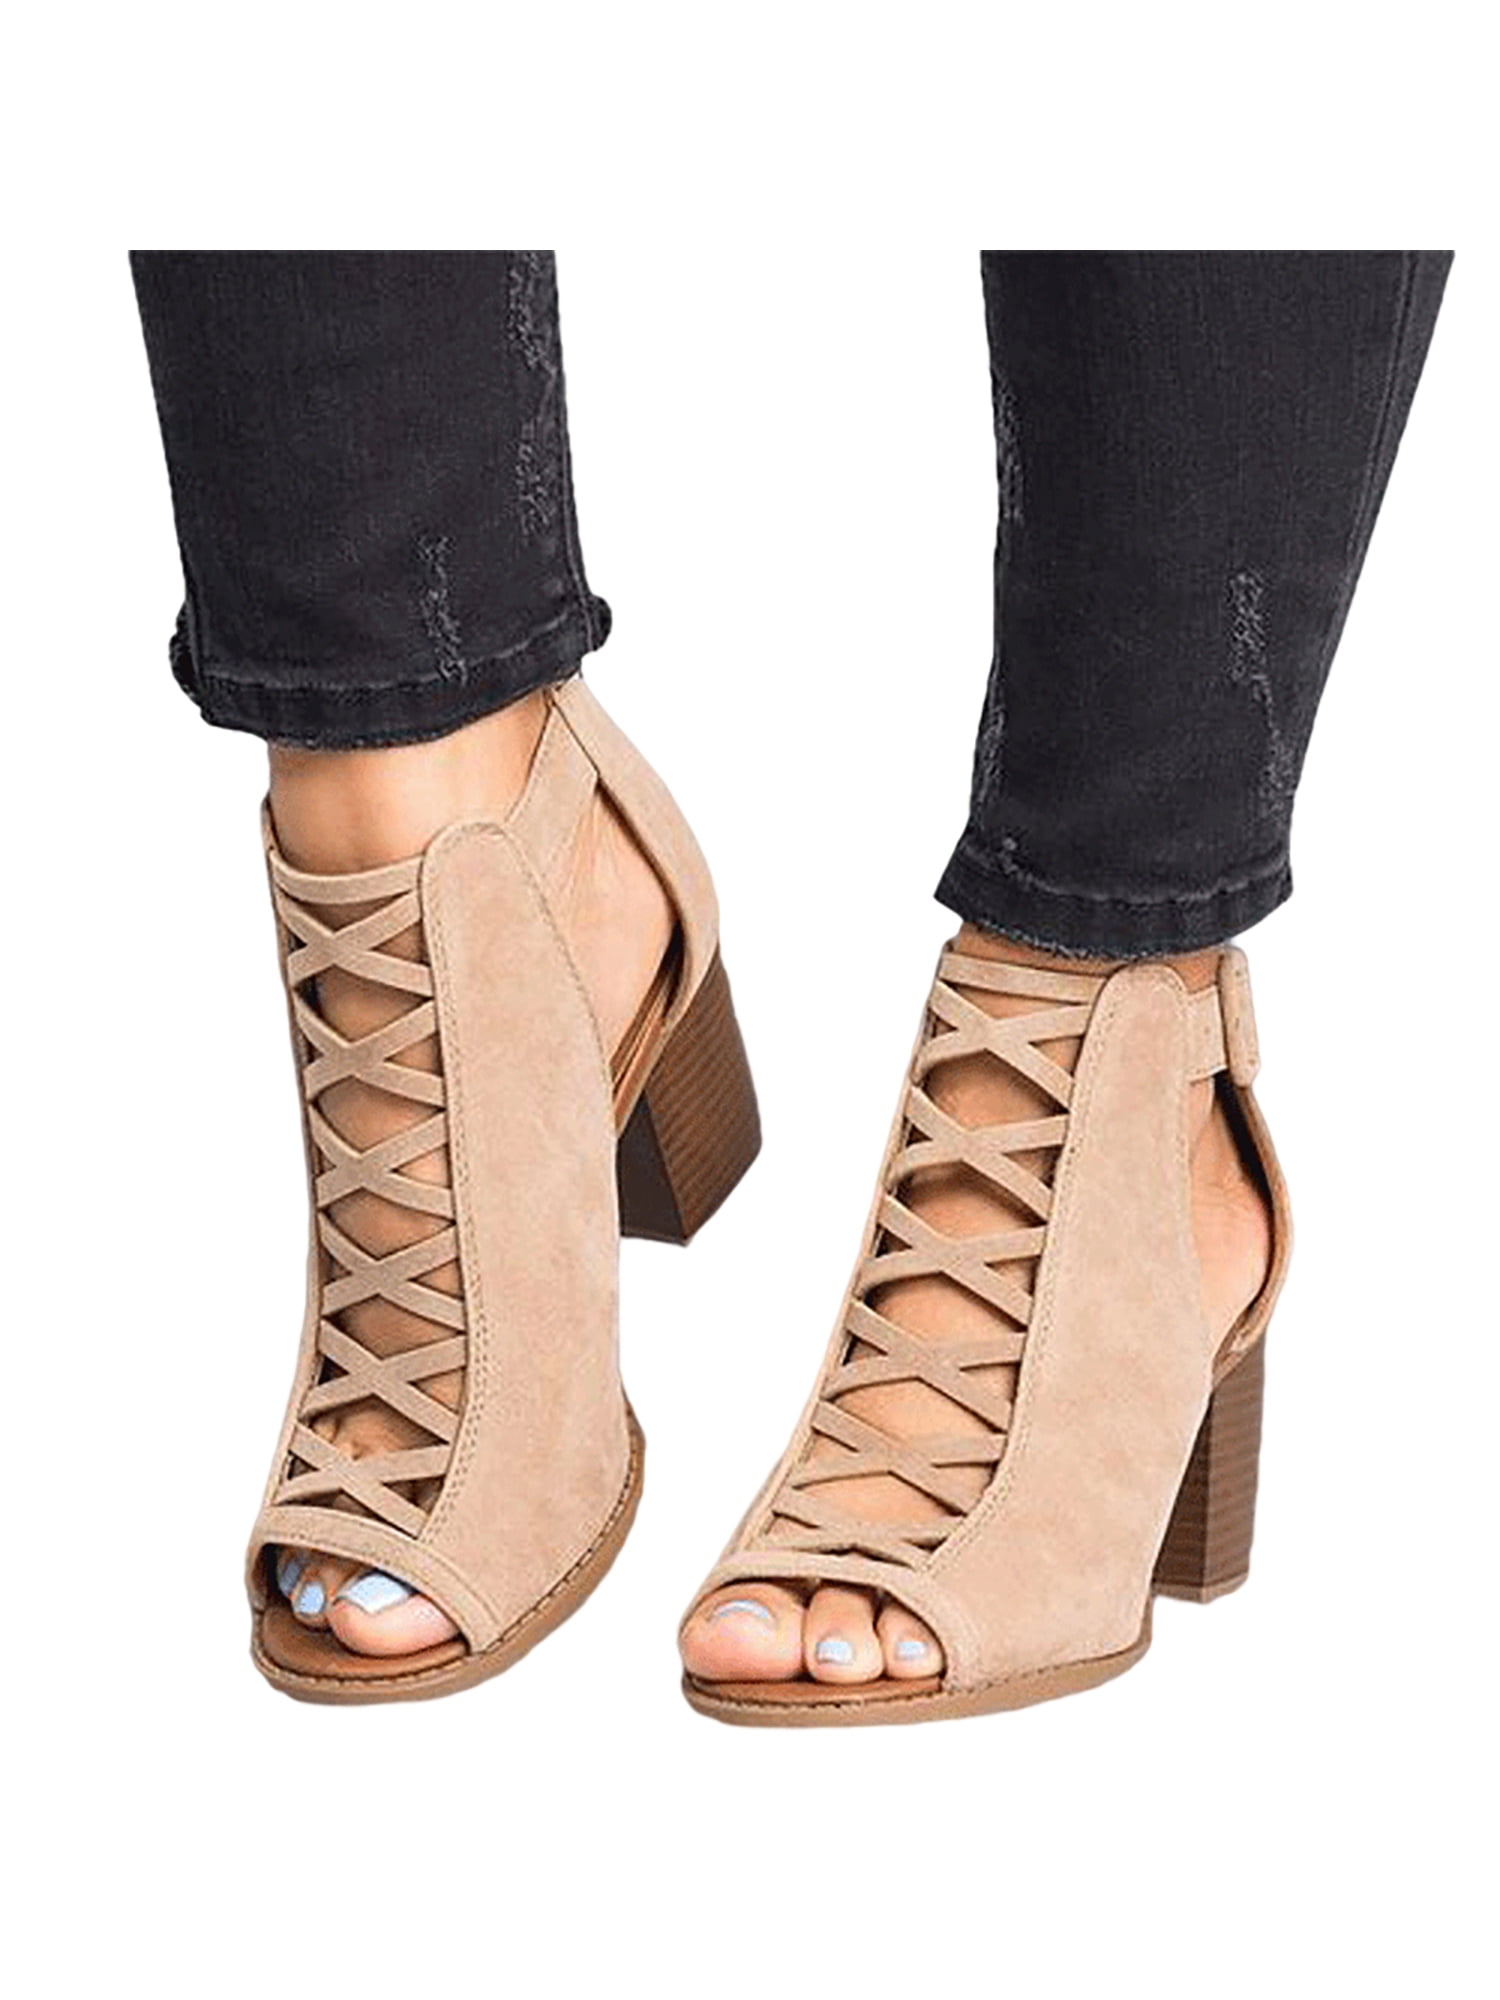 Womens Heeled Ankle Buckle Block Pointed Toe Cut Out Pumps Sandals 